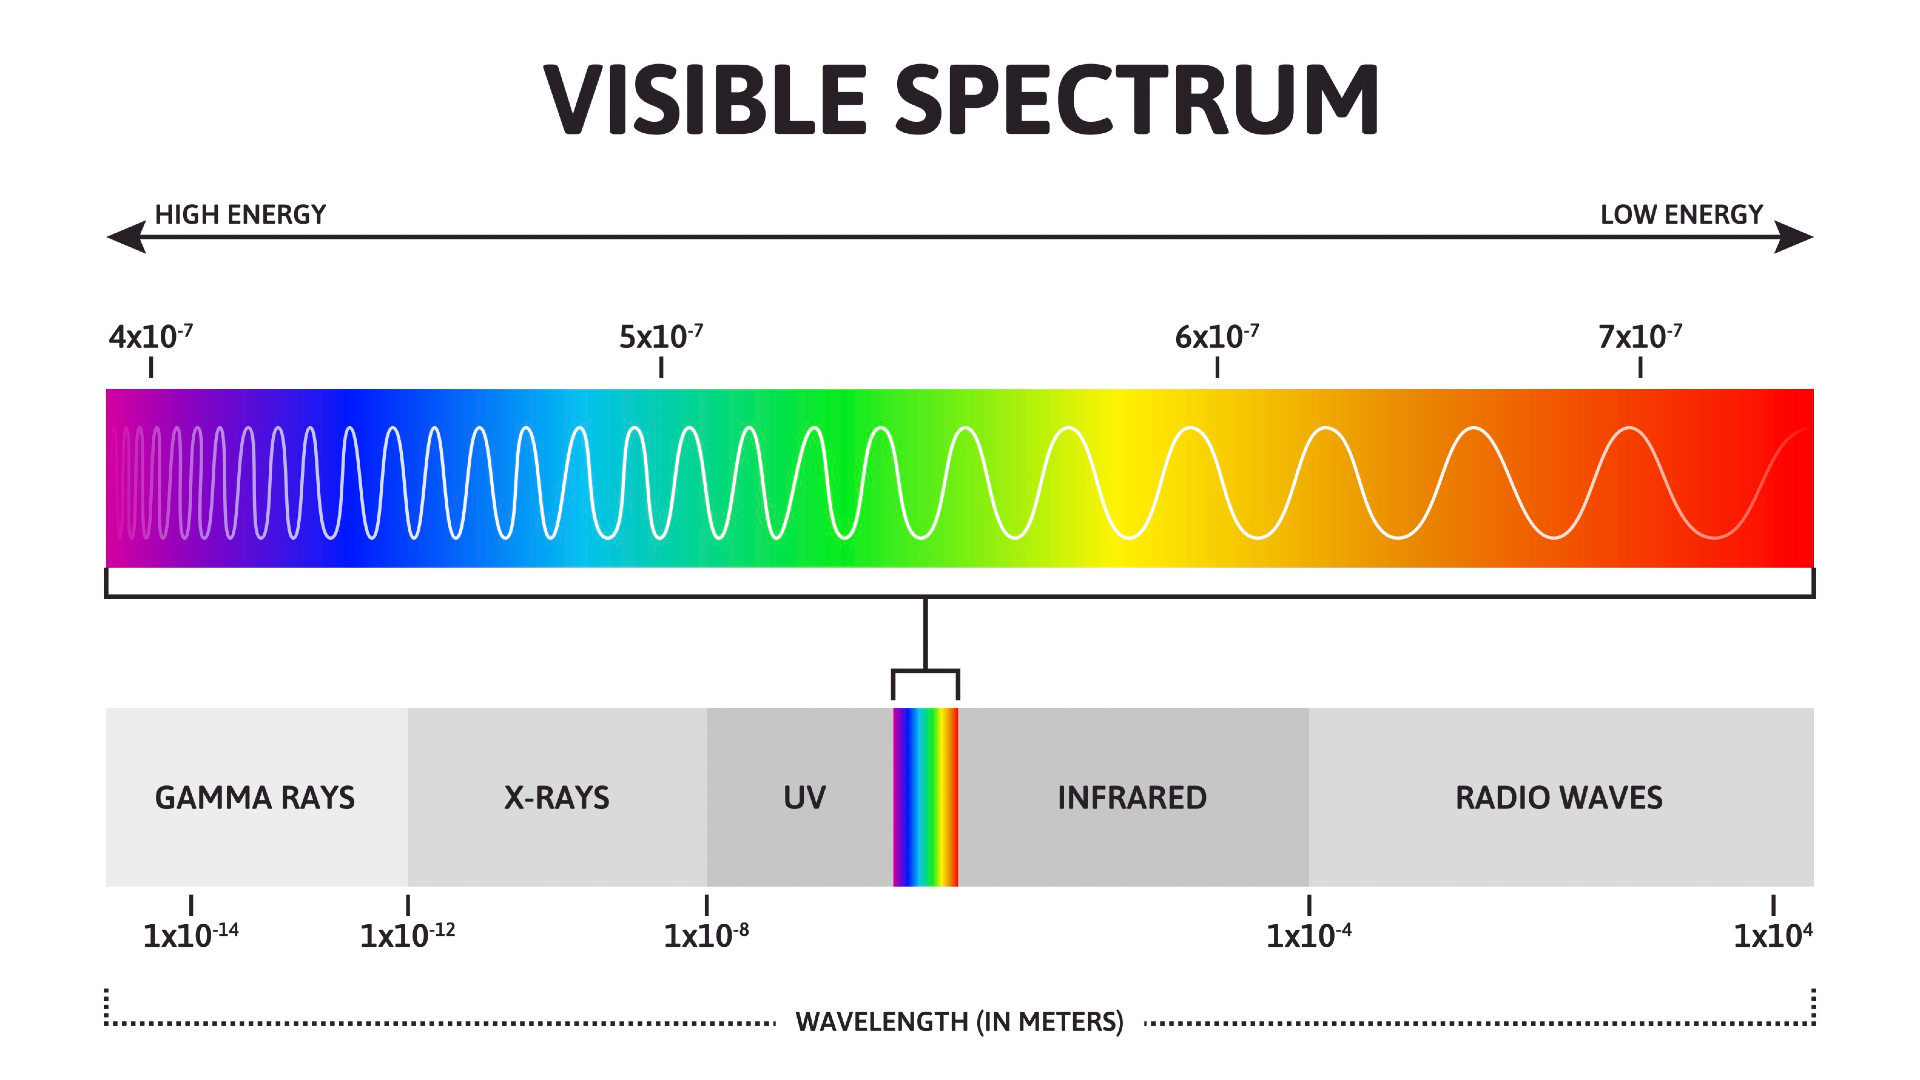 Diagram of the visible color spectrum. From left (high energy) to right (low energy) it goes gamma rays, x-rays, UV, infrared, and then radio waves.